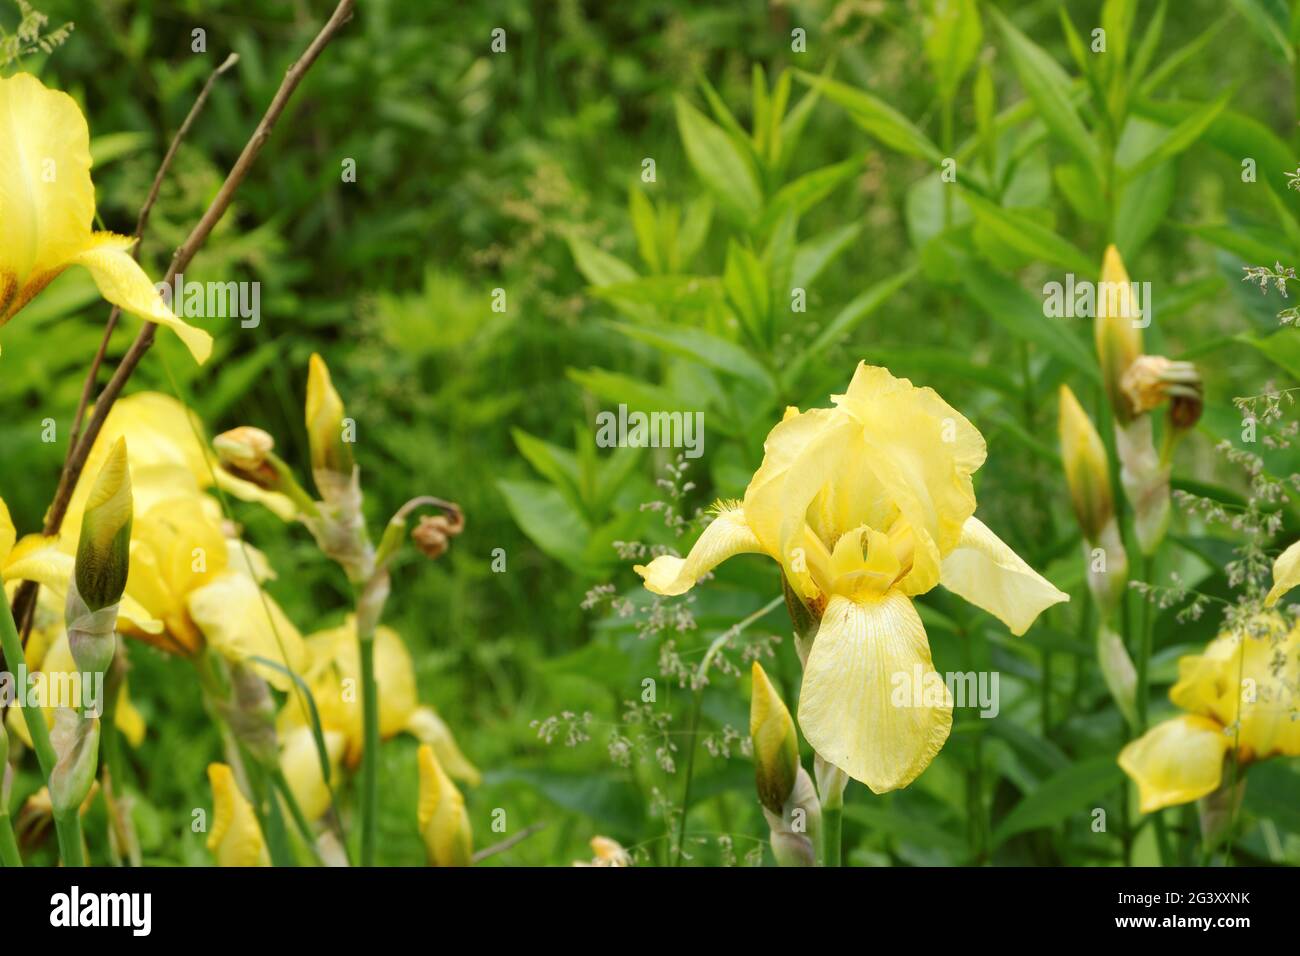 Wild yellow irises on a blurred background of a sunny green glade. Selective focus. Stock Photo